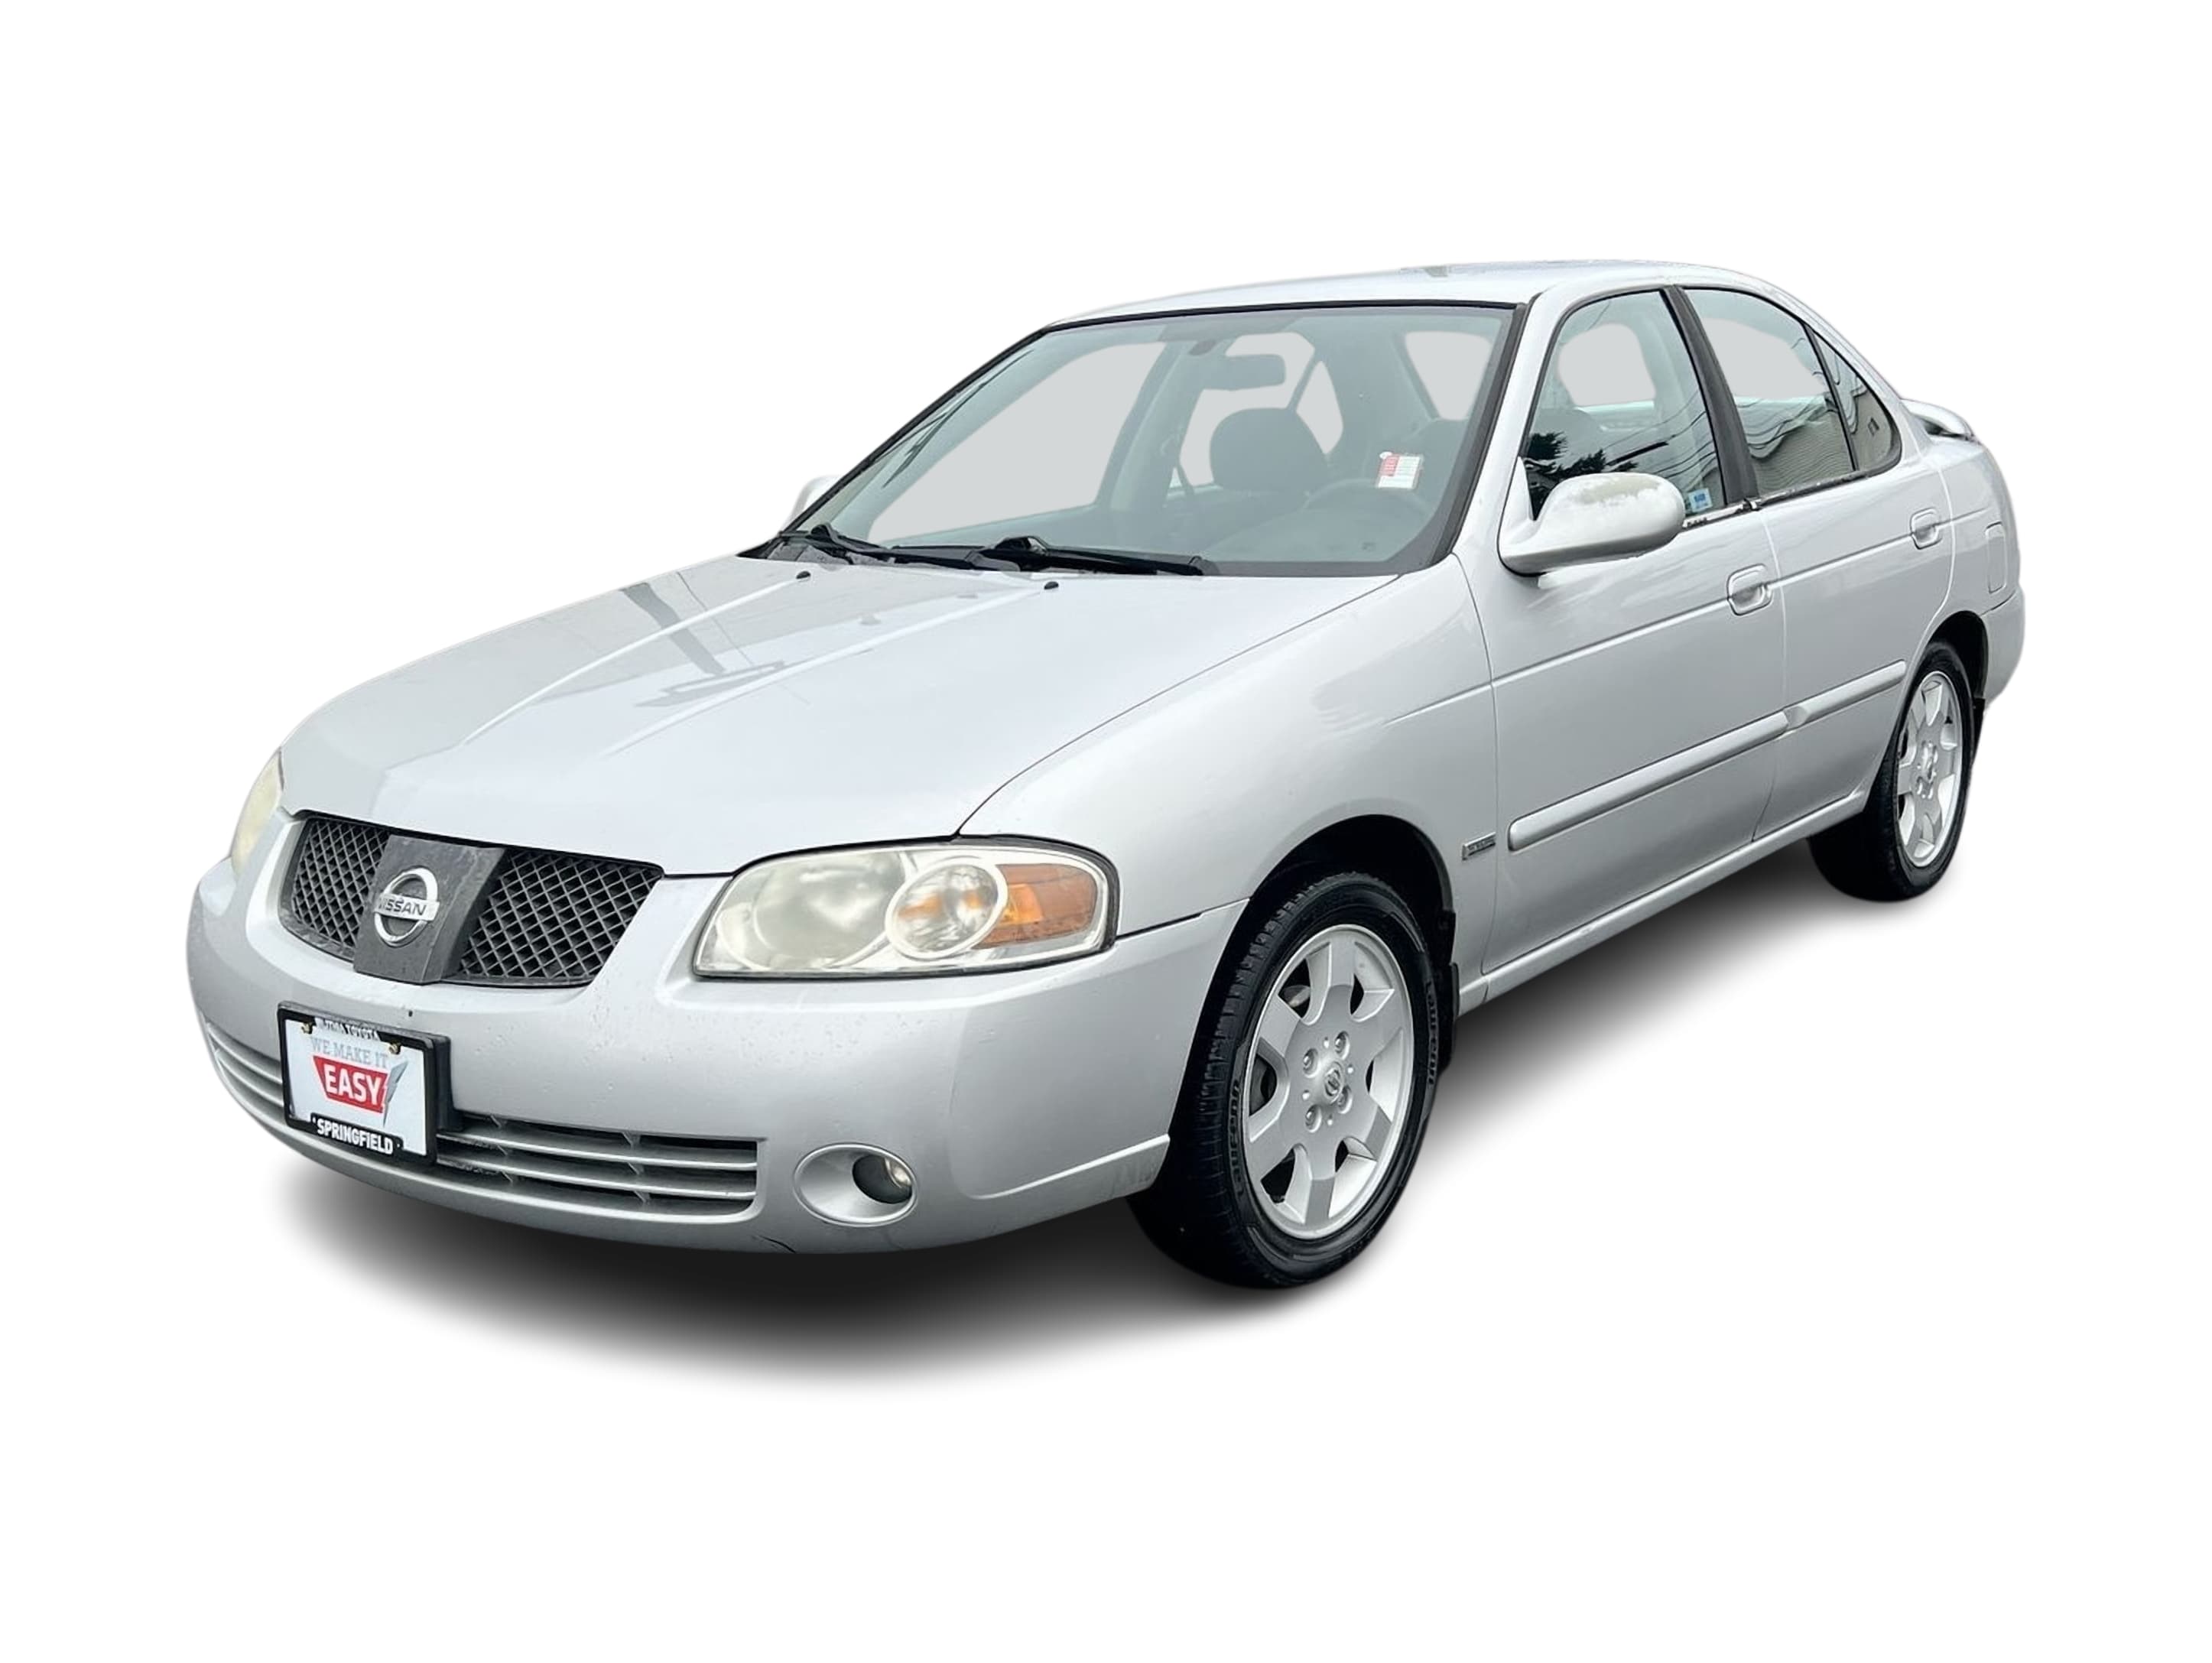 2005 Nissan Sentra S -
                Springfield, OR